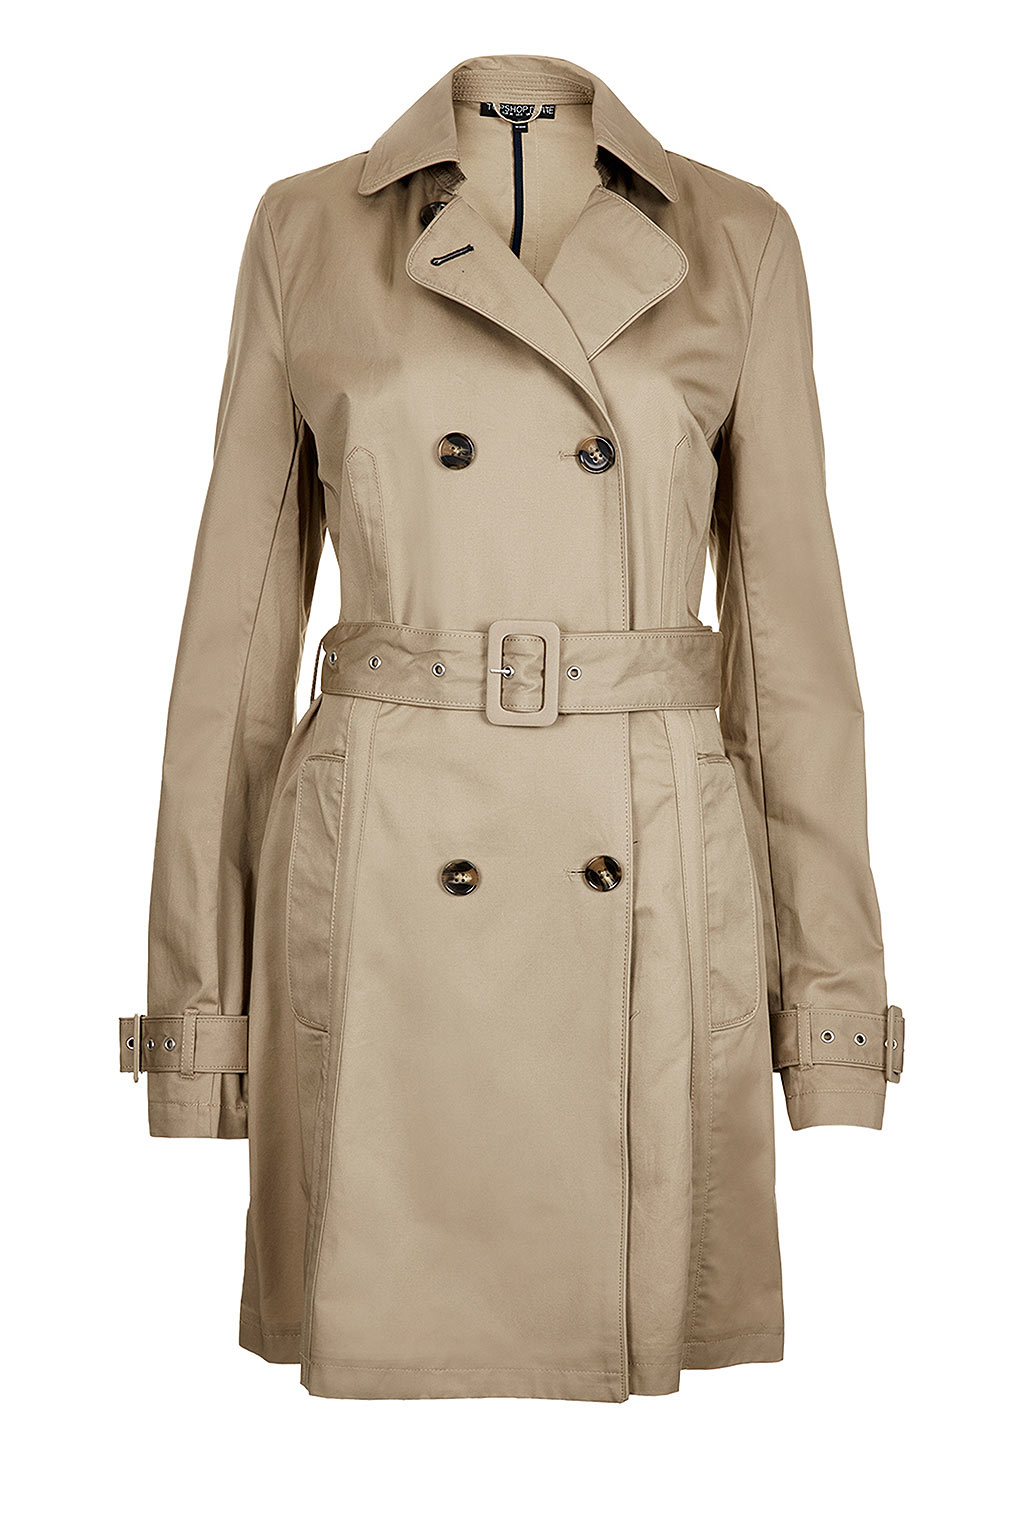 Lyst - Topshop Petite Unlined Trench Coat in Natural